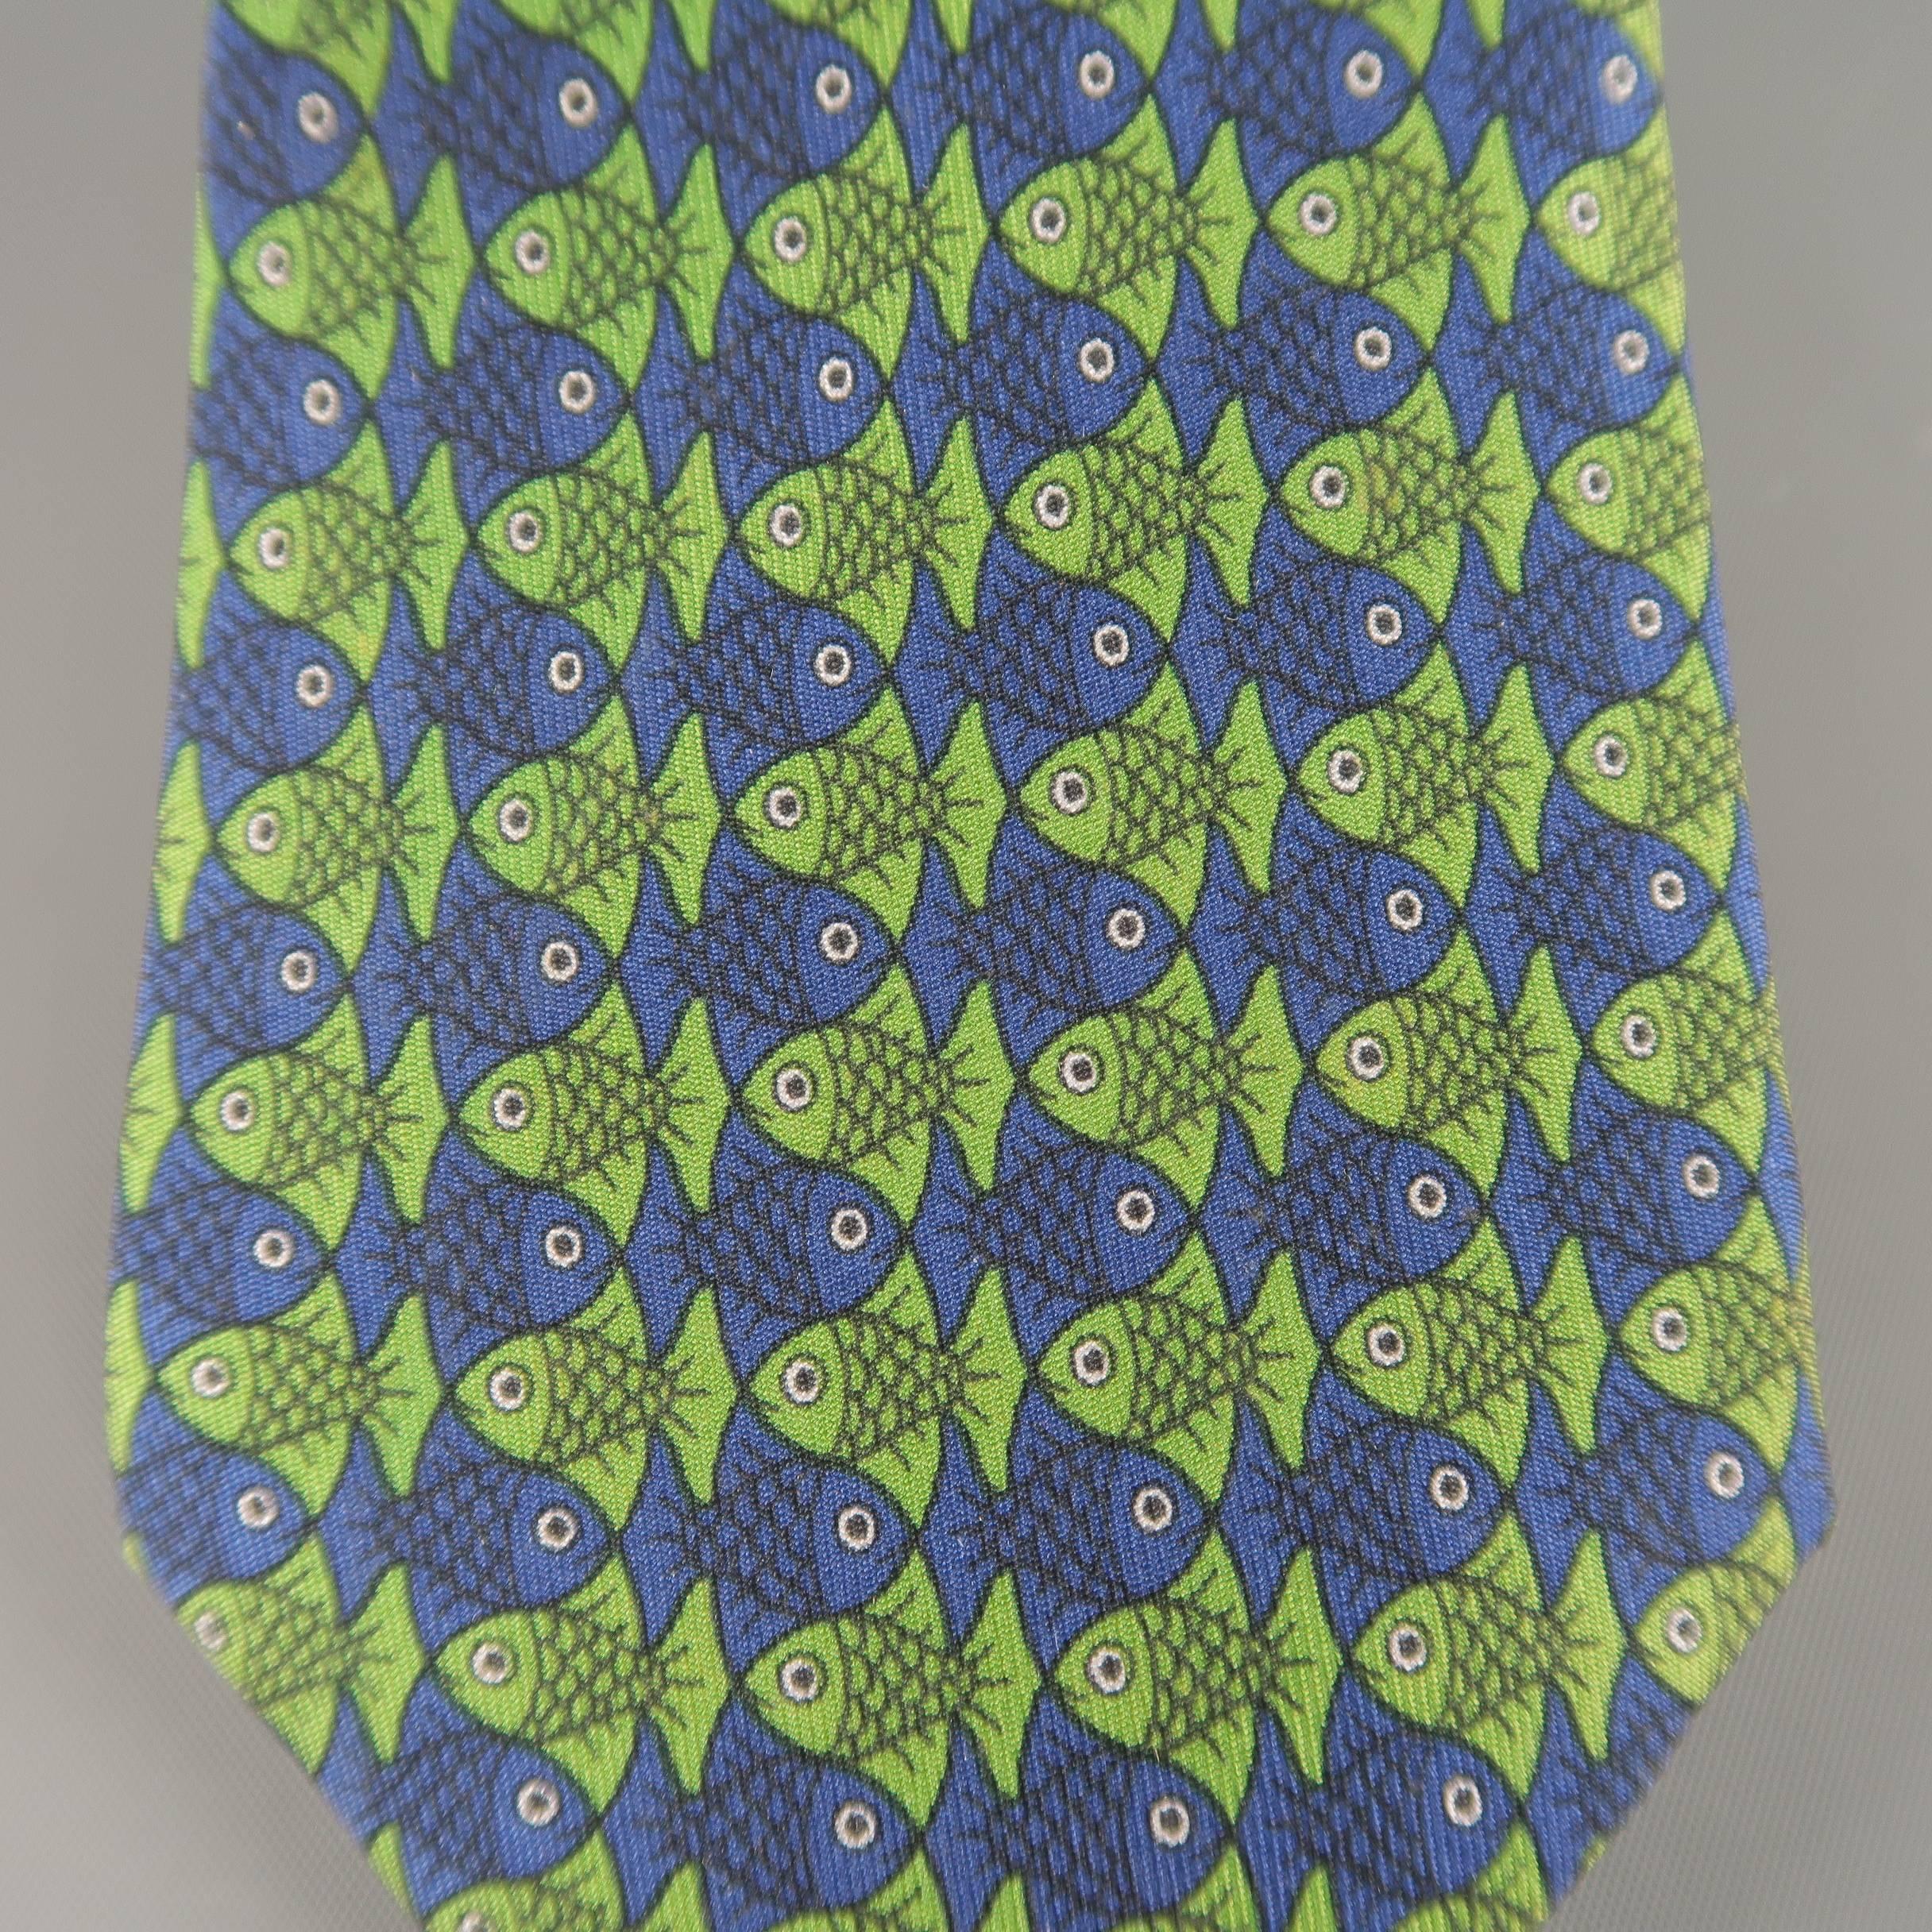 Vintage HERMES necktie comes in silk twill with all over navy blue and green fish print. Made in France.
 
Excellent Pre-Owned Condition.
 
Width: 3 in.
